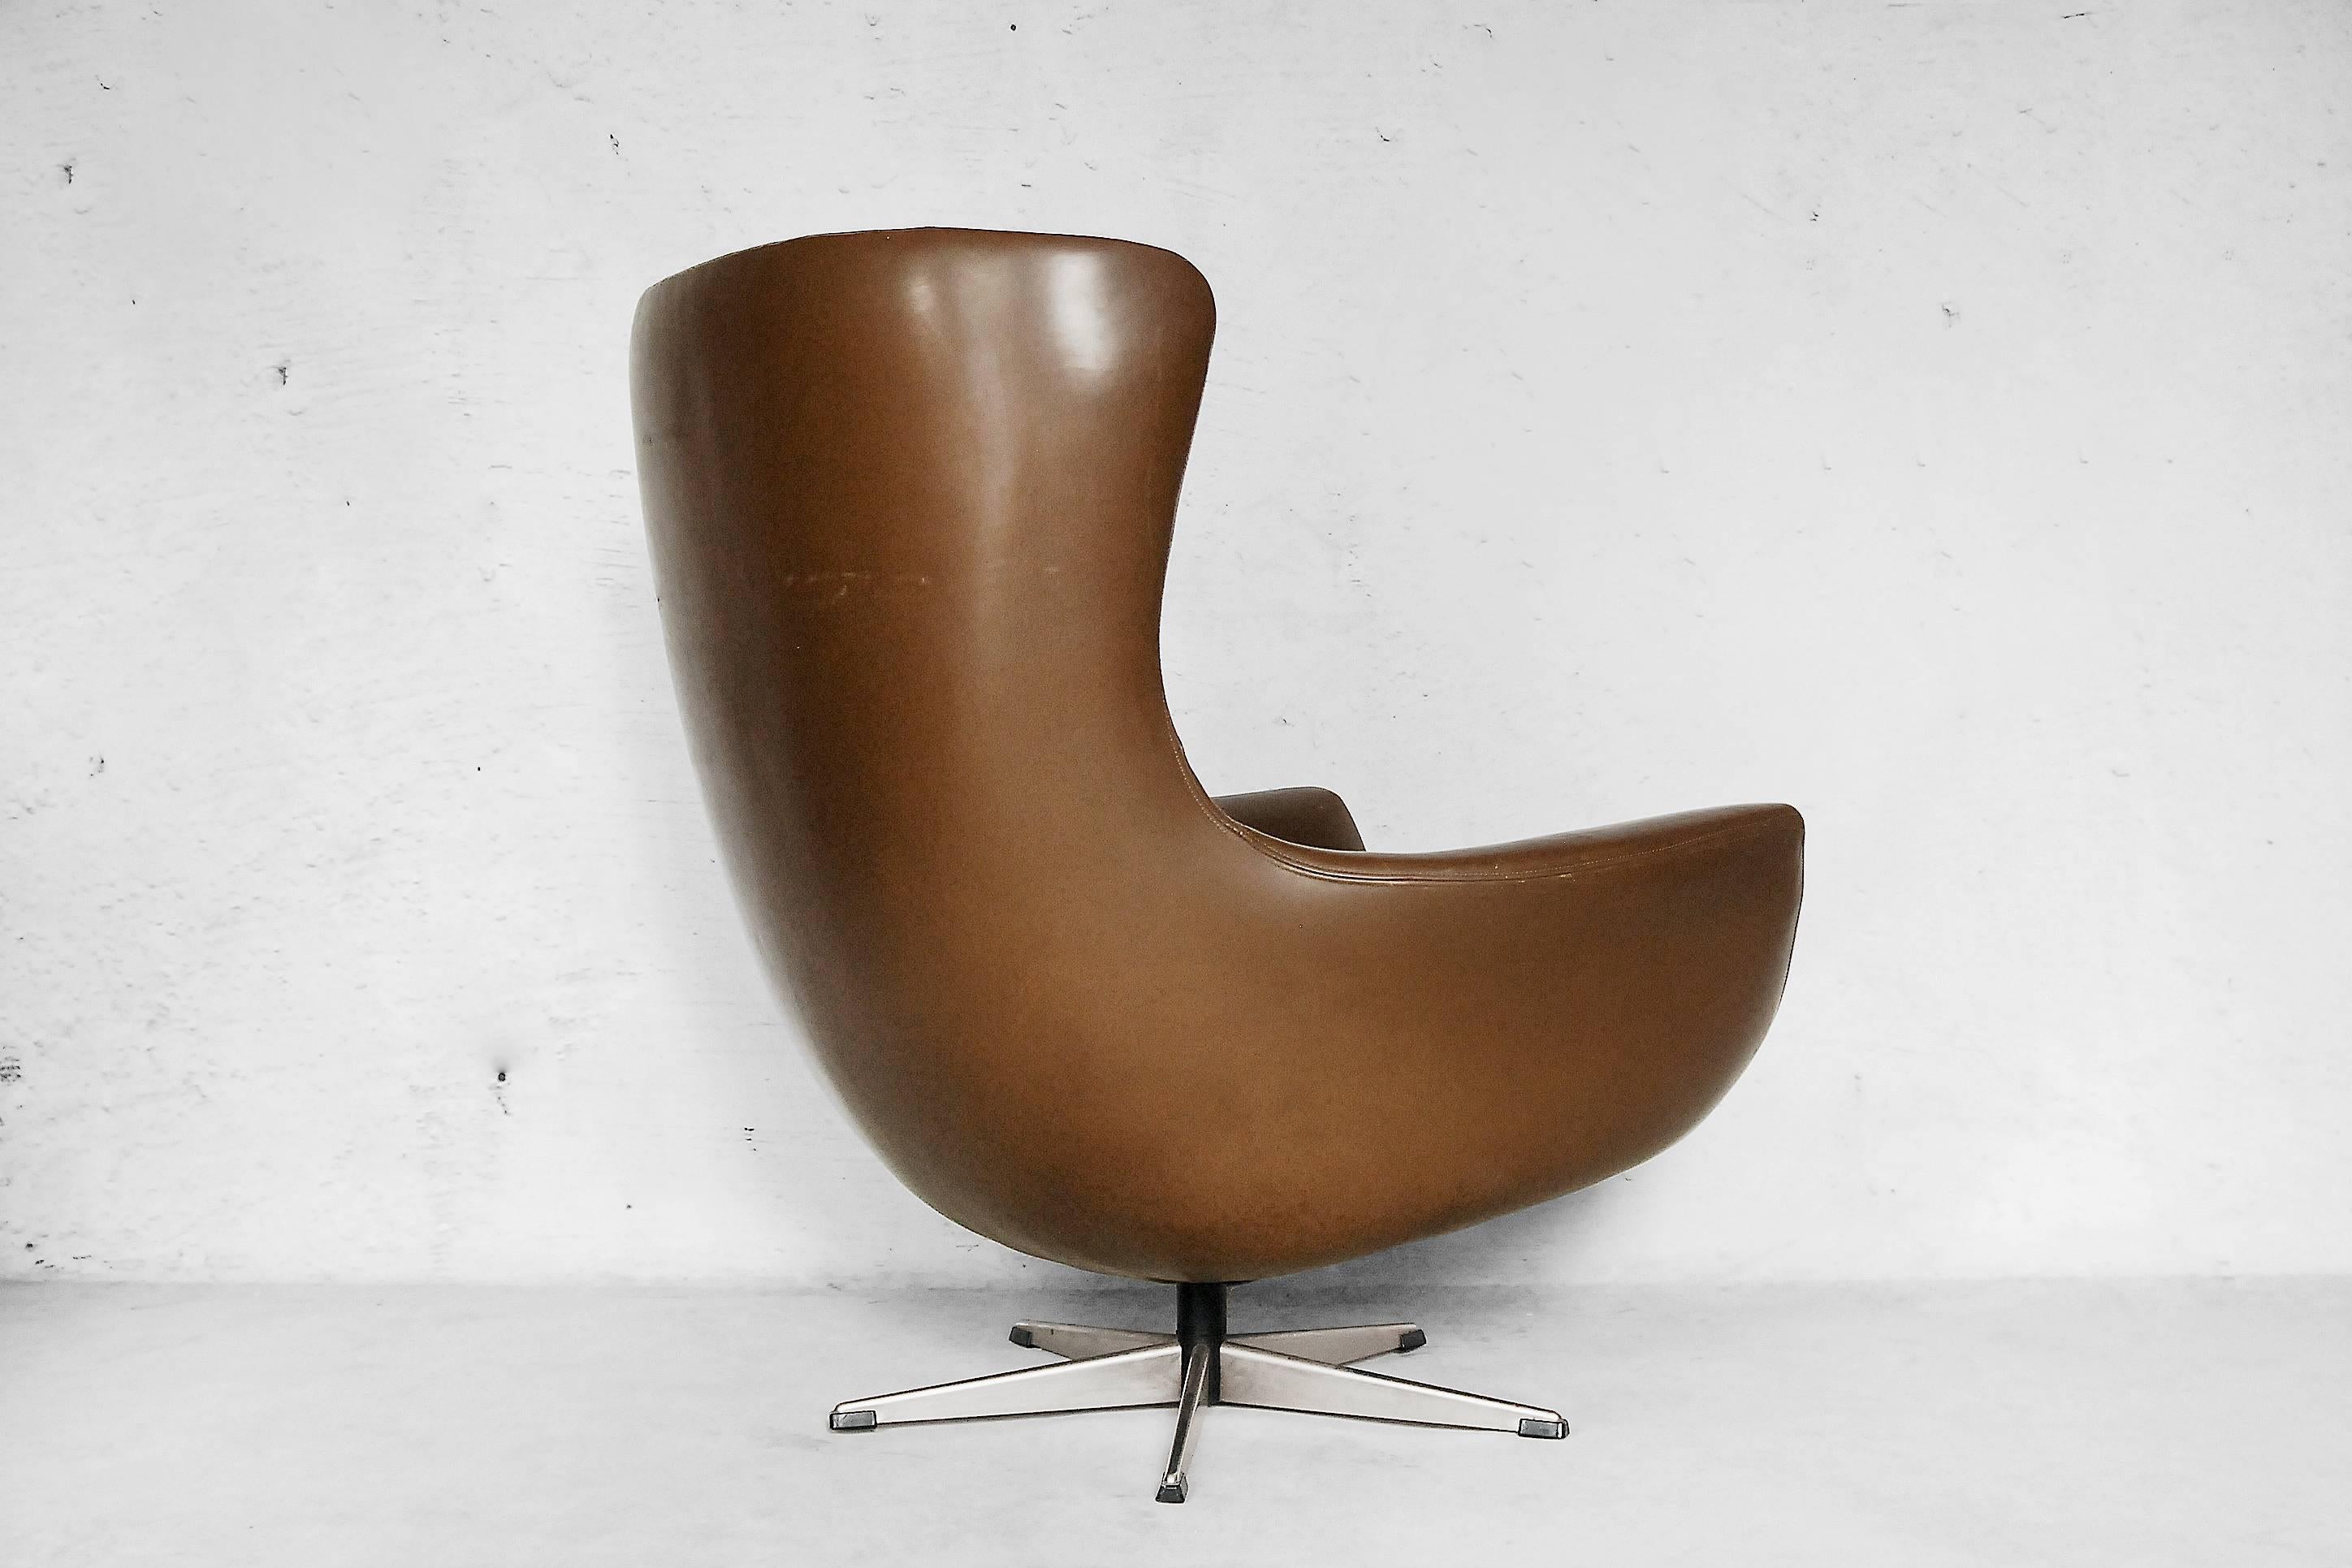 This Mid-Century Modern chair was manufactured in Scandinavia during the 1960s. It has a modern egg form referring to the Space Age style, similar to Arne Jacobsen projects. It is made from varnished leather in a brown color and has a swivel base